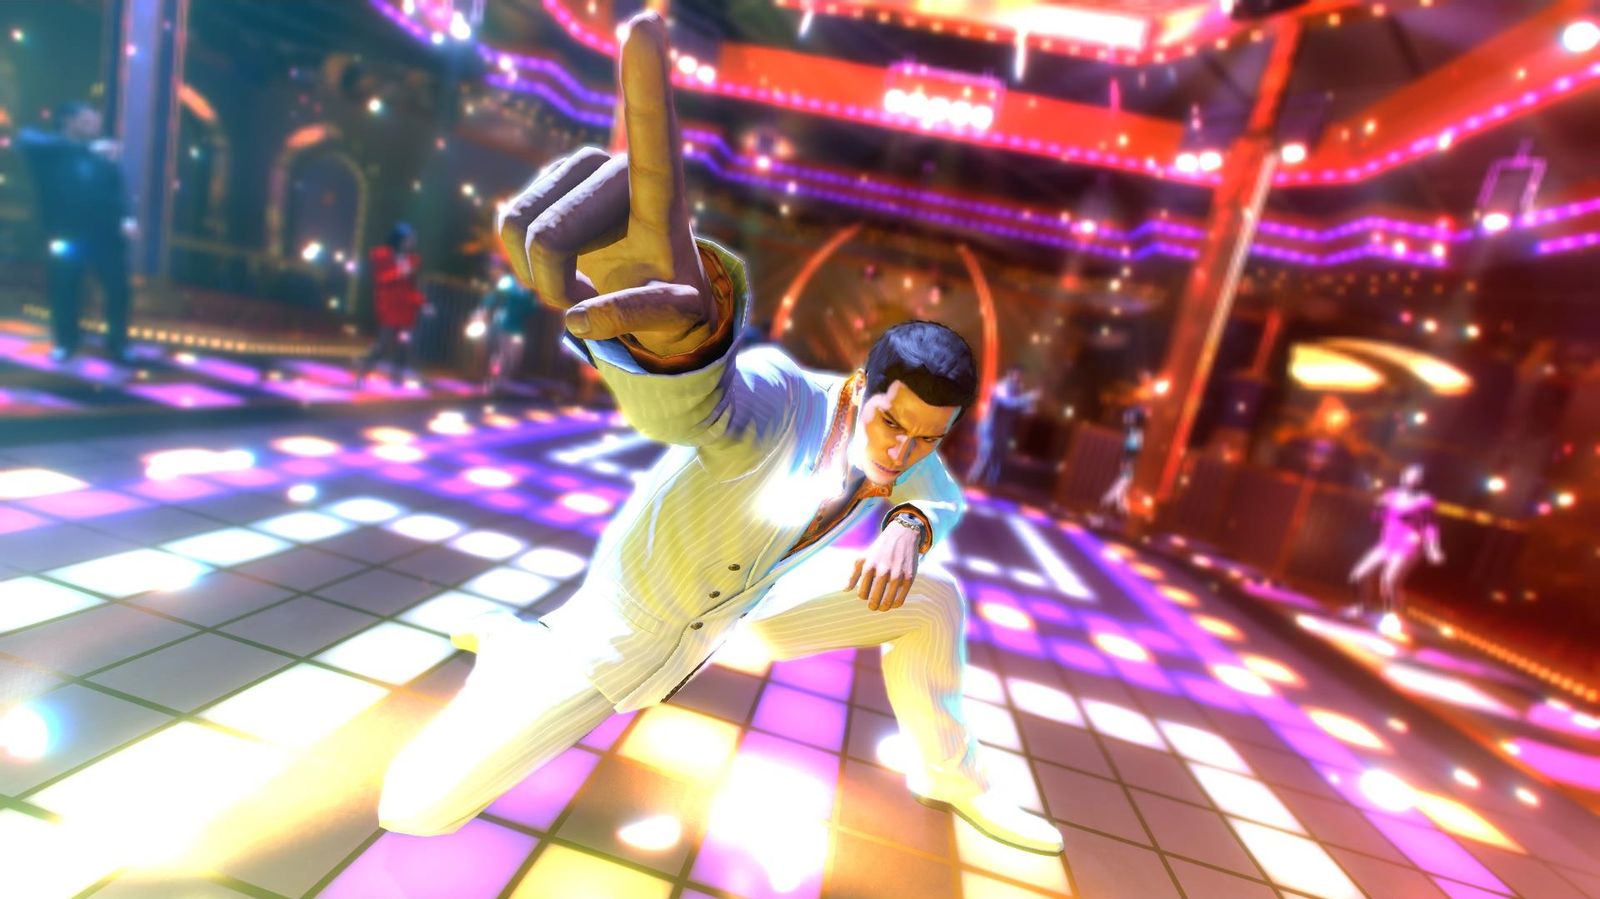 Yakuza 0 is a must-play experience for Xbox Game Pass subscribers